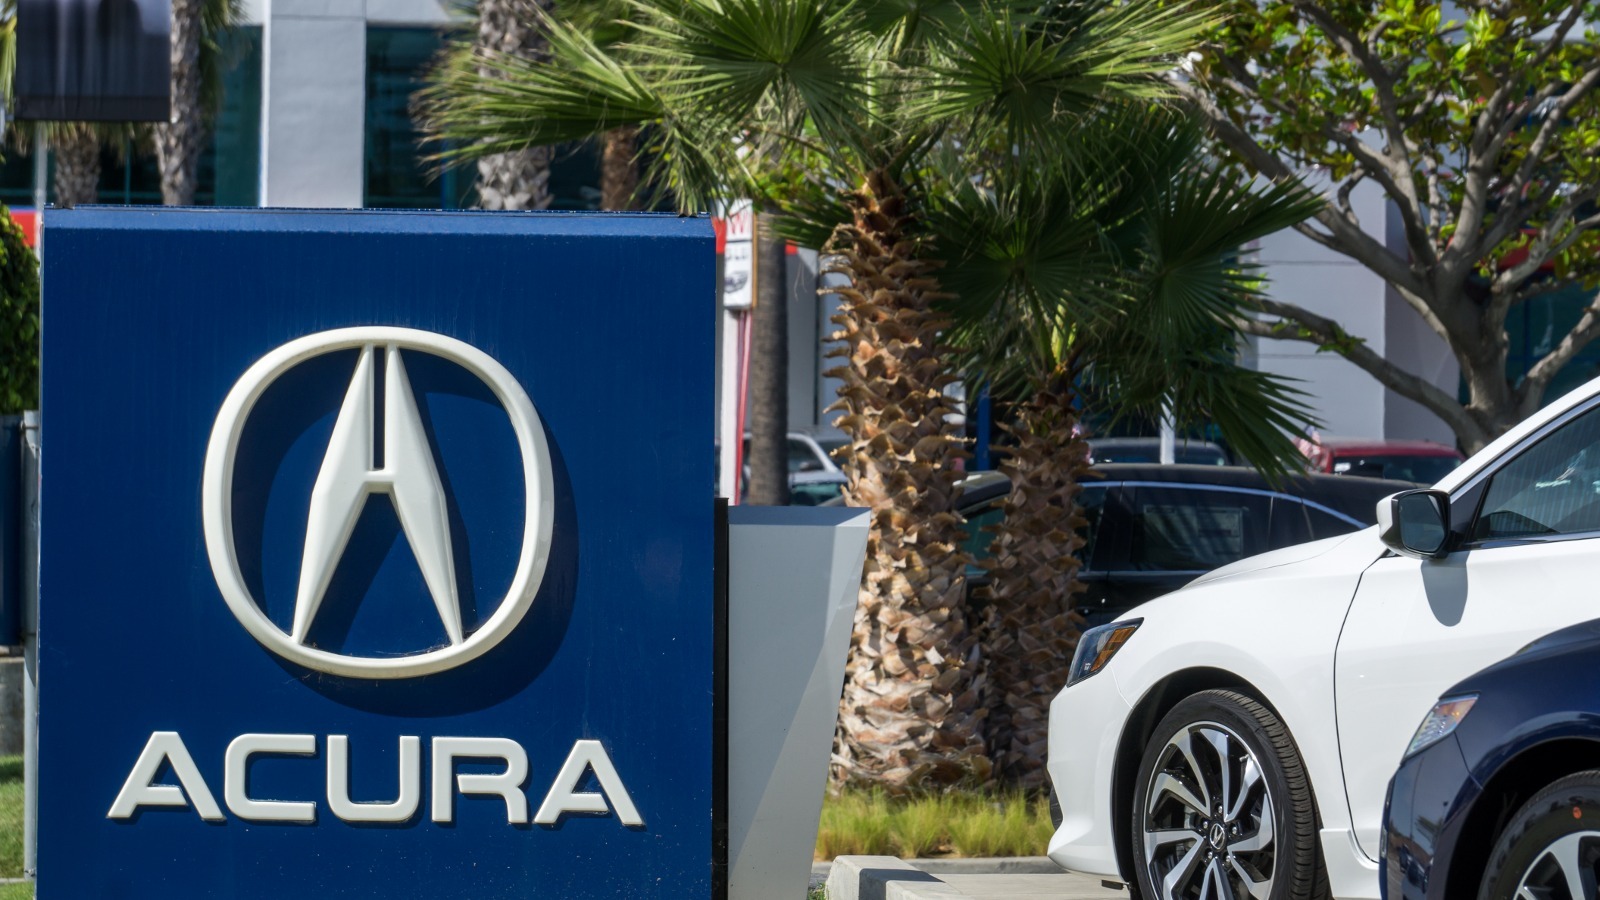 Are Acura Vehicles Made In Japan Or The USA?